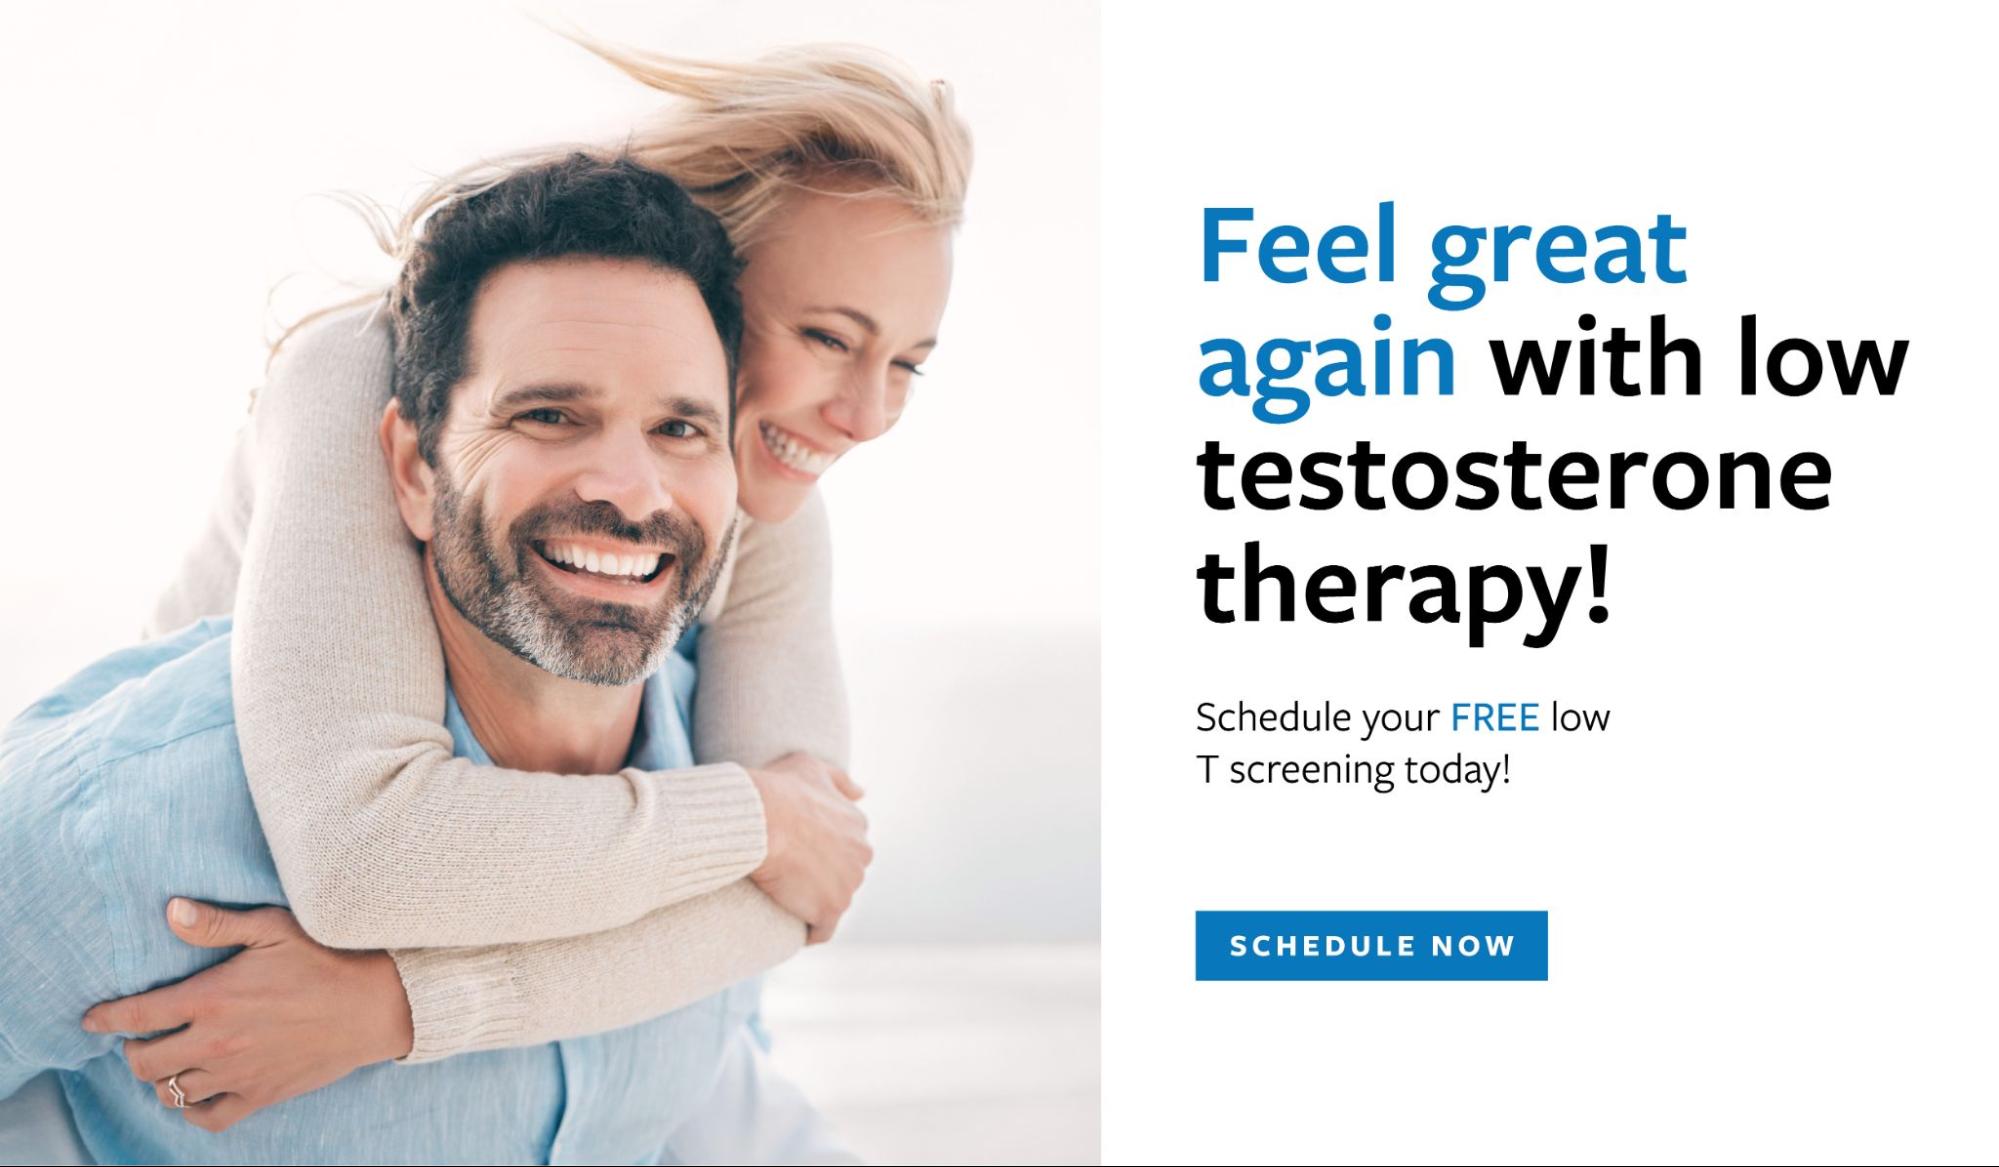 Feel great again with low testosterone therapy! Schedule your FREE low T screening today!